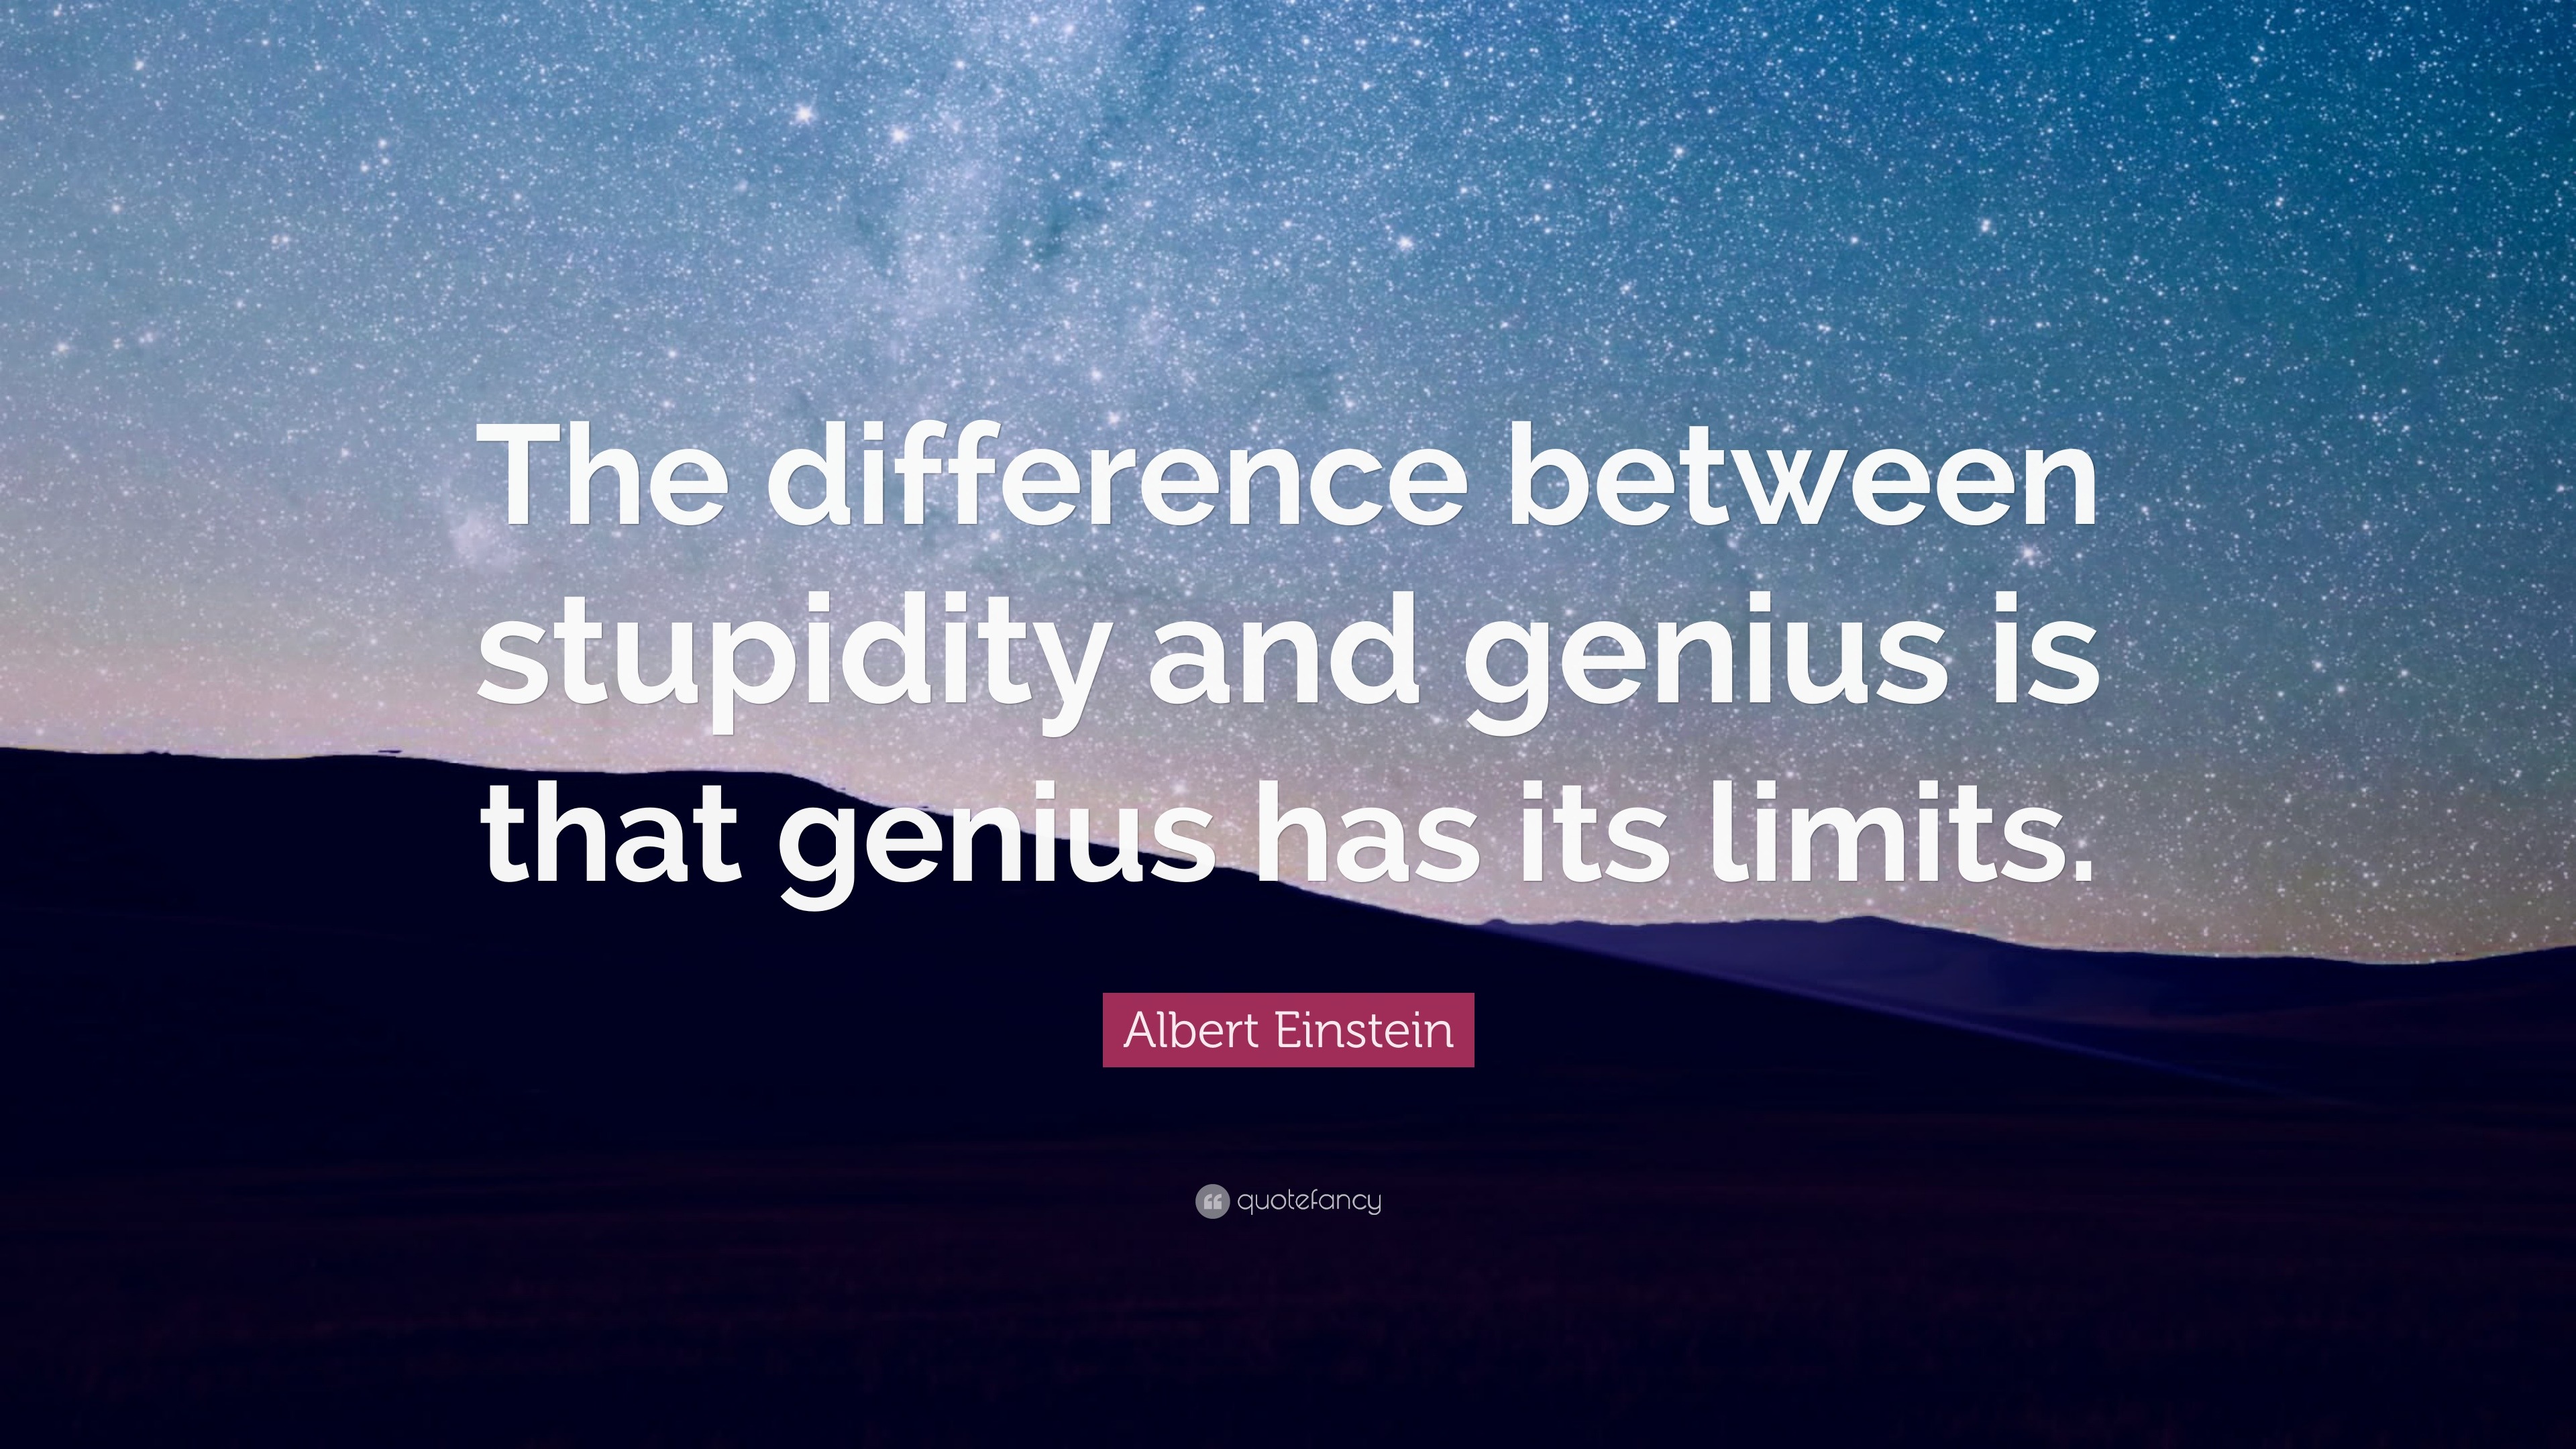 Einstein Quotes About Stupidity / 100+ Most Inspirational Albert Einstein Quotes & Wallpapers - Albert einstein quotes are quirky, fun, and at times encouraging and always thoughtful.